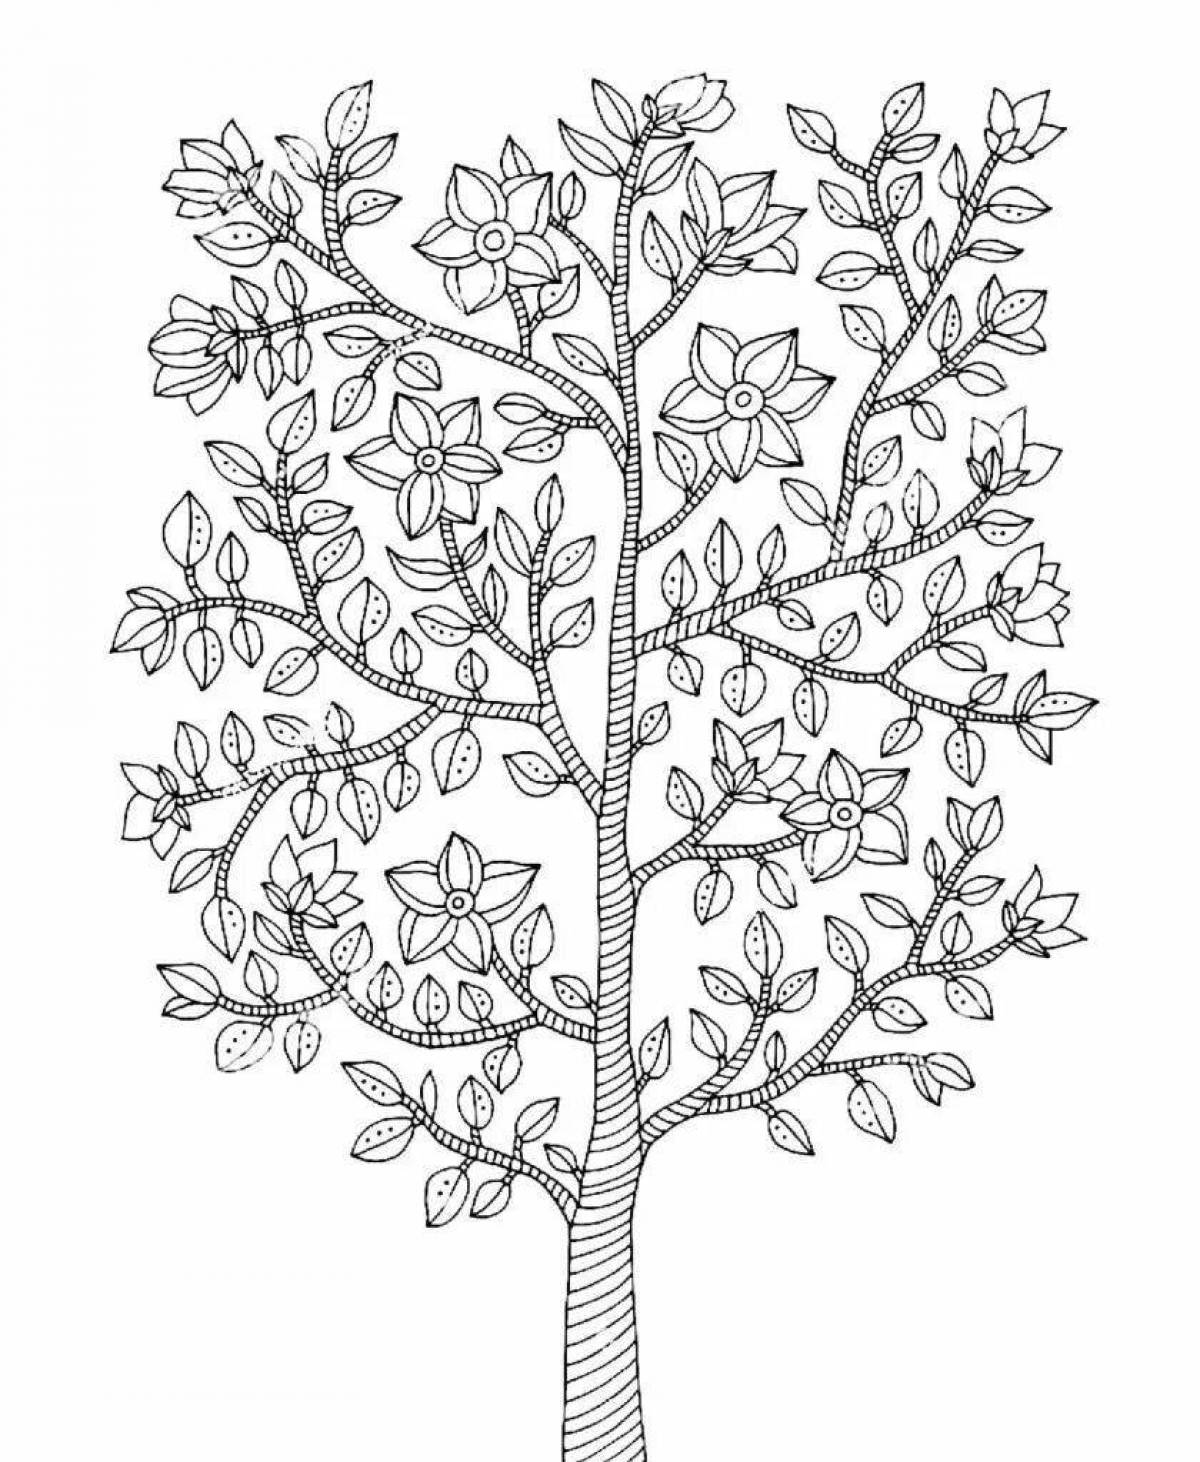 Coloring page charming mountain ash